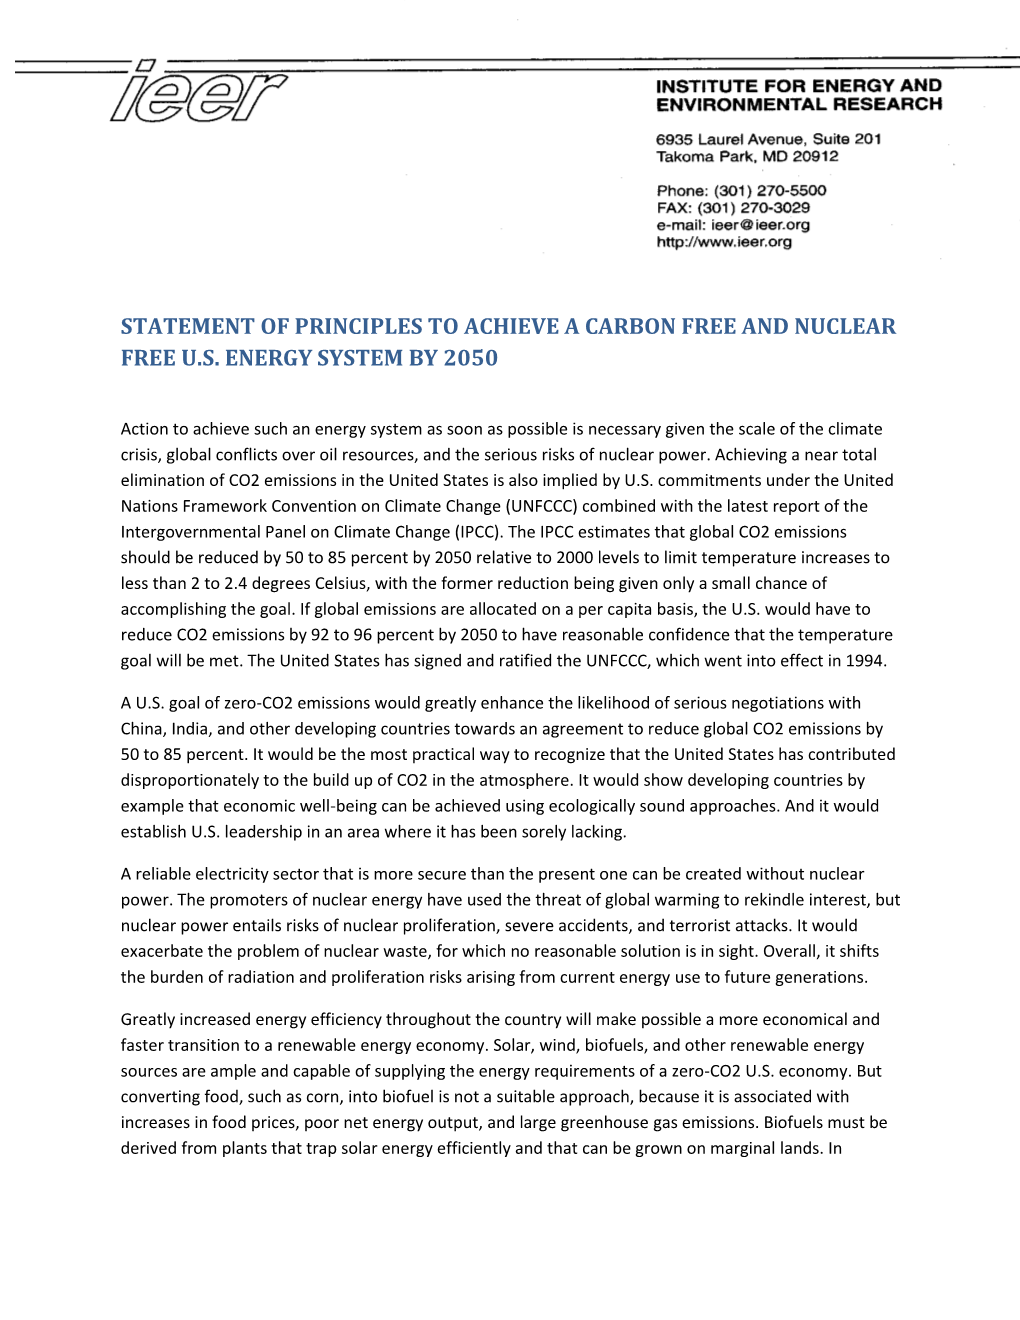 Statement of Principles to Achieve a Carbon Free and Nuclear Free U.S